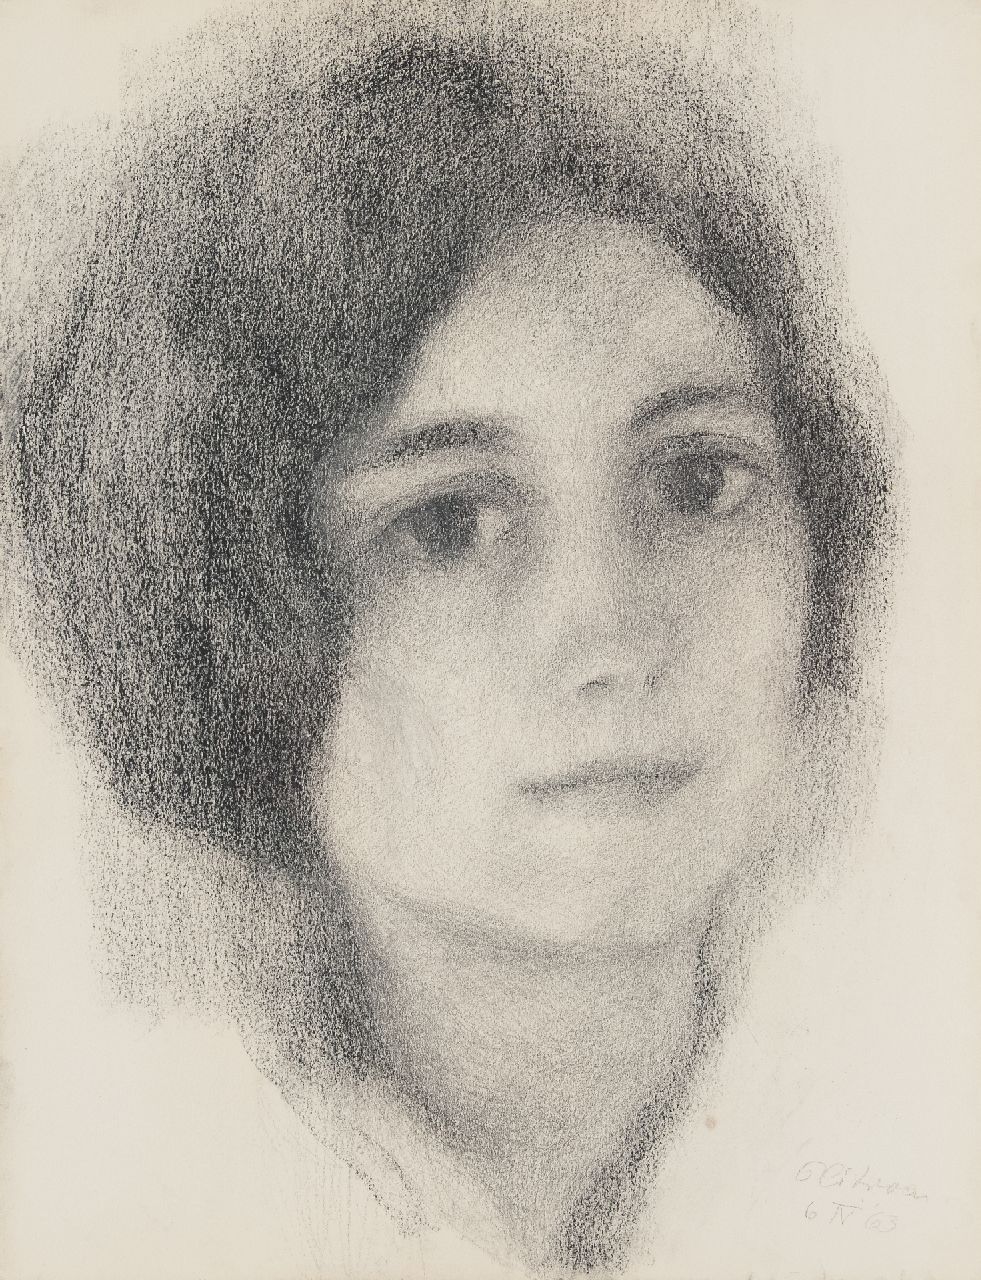 Citroen R.P.  | Roelof 'Paul' Citroen | Watercolours and drawings offered for sale | Portrait of a young woman, black chalk on paper 64.9 x 45.9 cm, signed l.r. and dated 6 IV '63